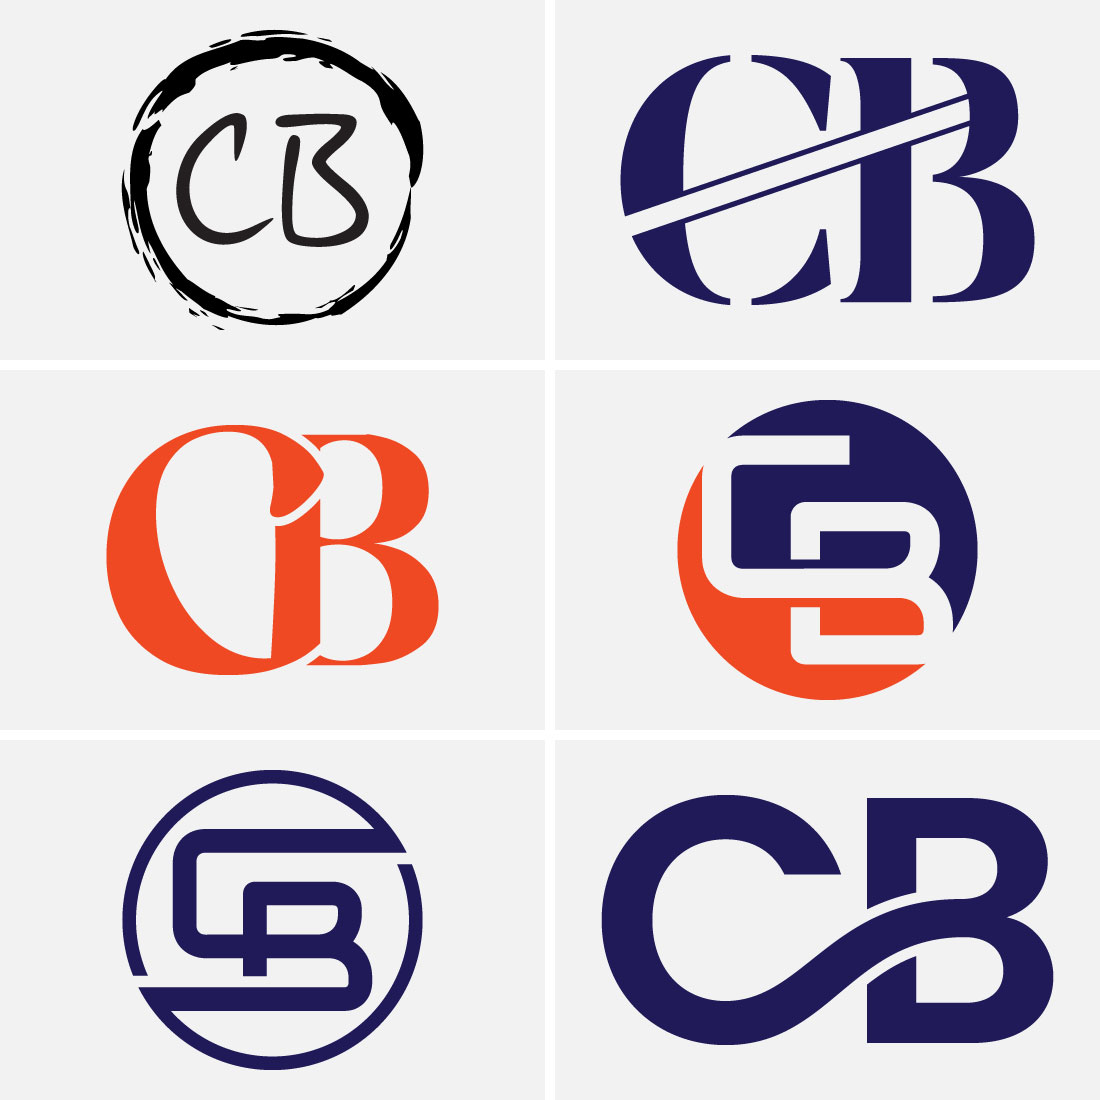 C B Initial Letter Logo Design, Graphic Alphabet Symbol for Corporate Business Identity cover image.